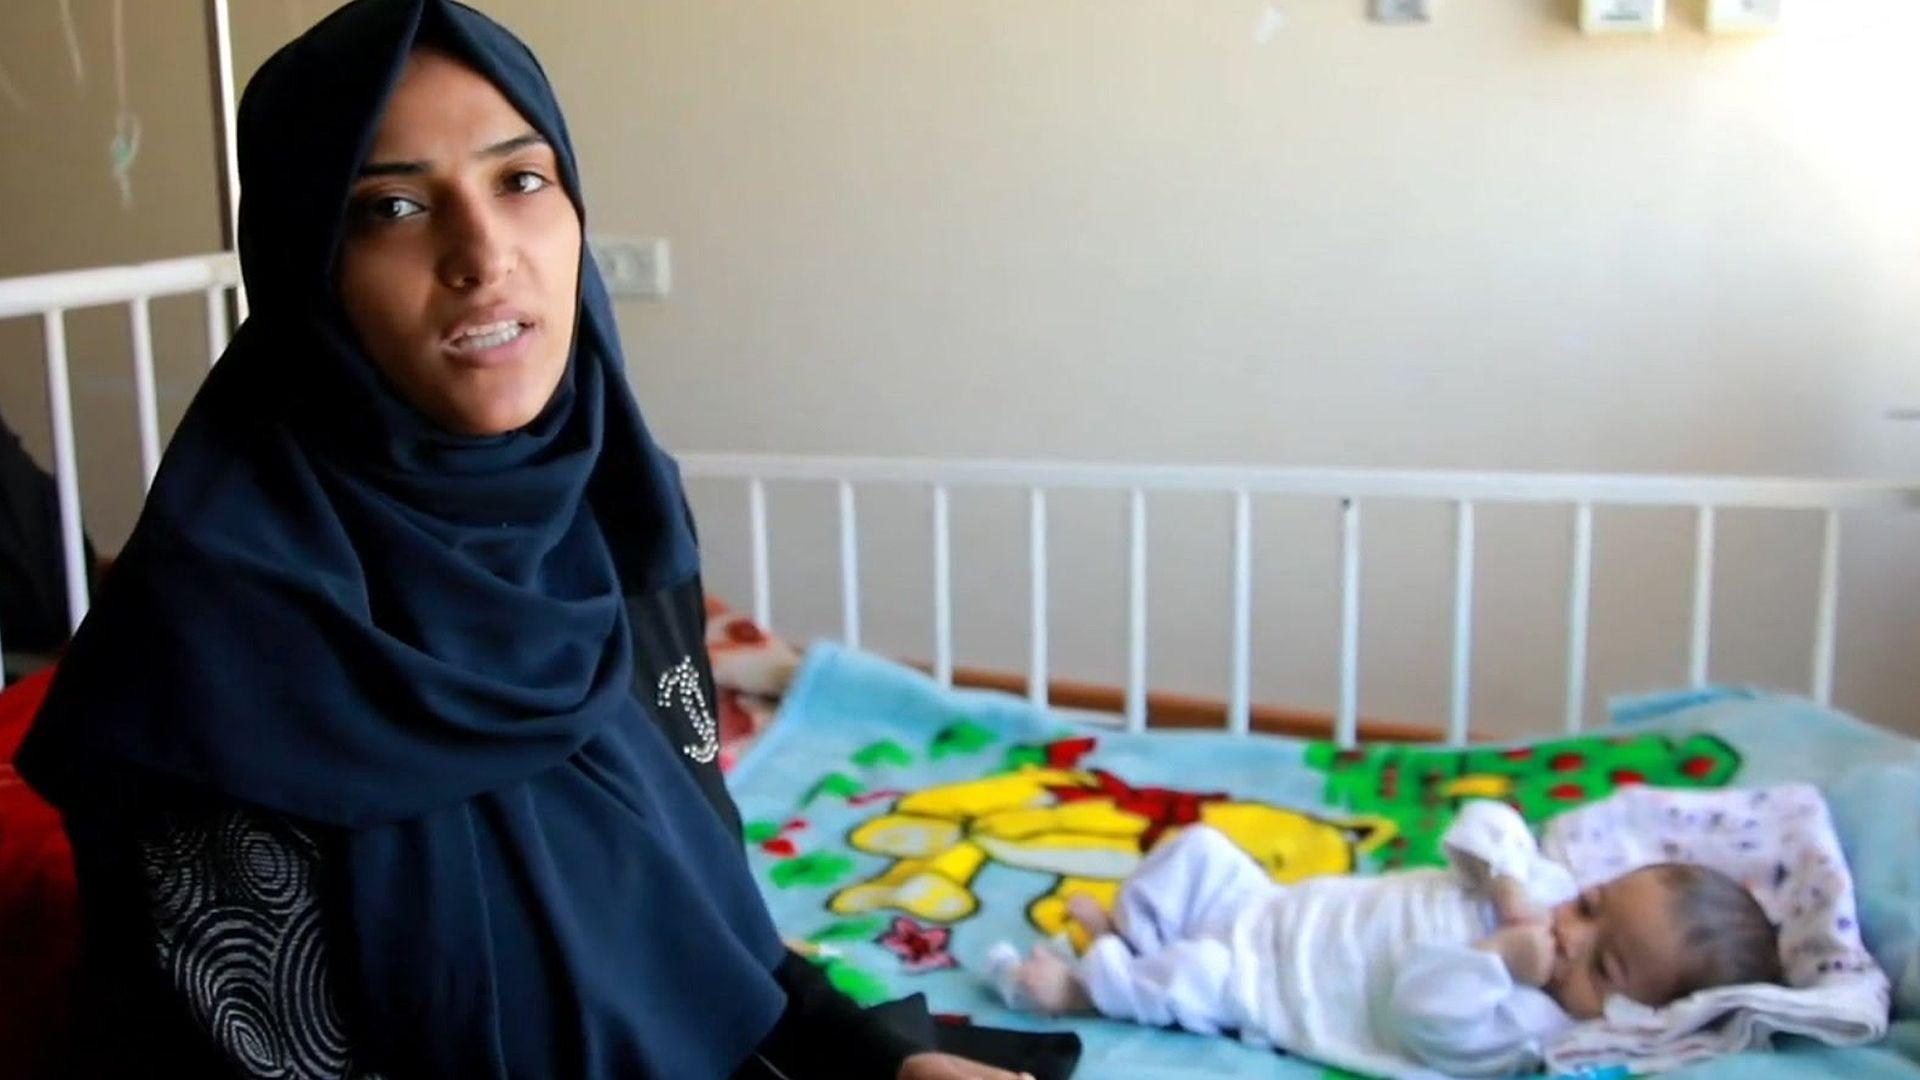 Gaza: A mothers desperate plea to feed her baby